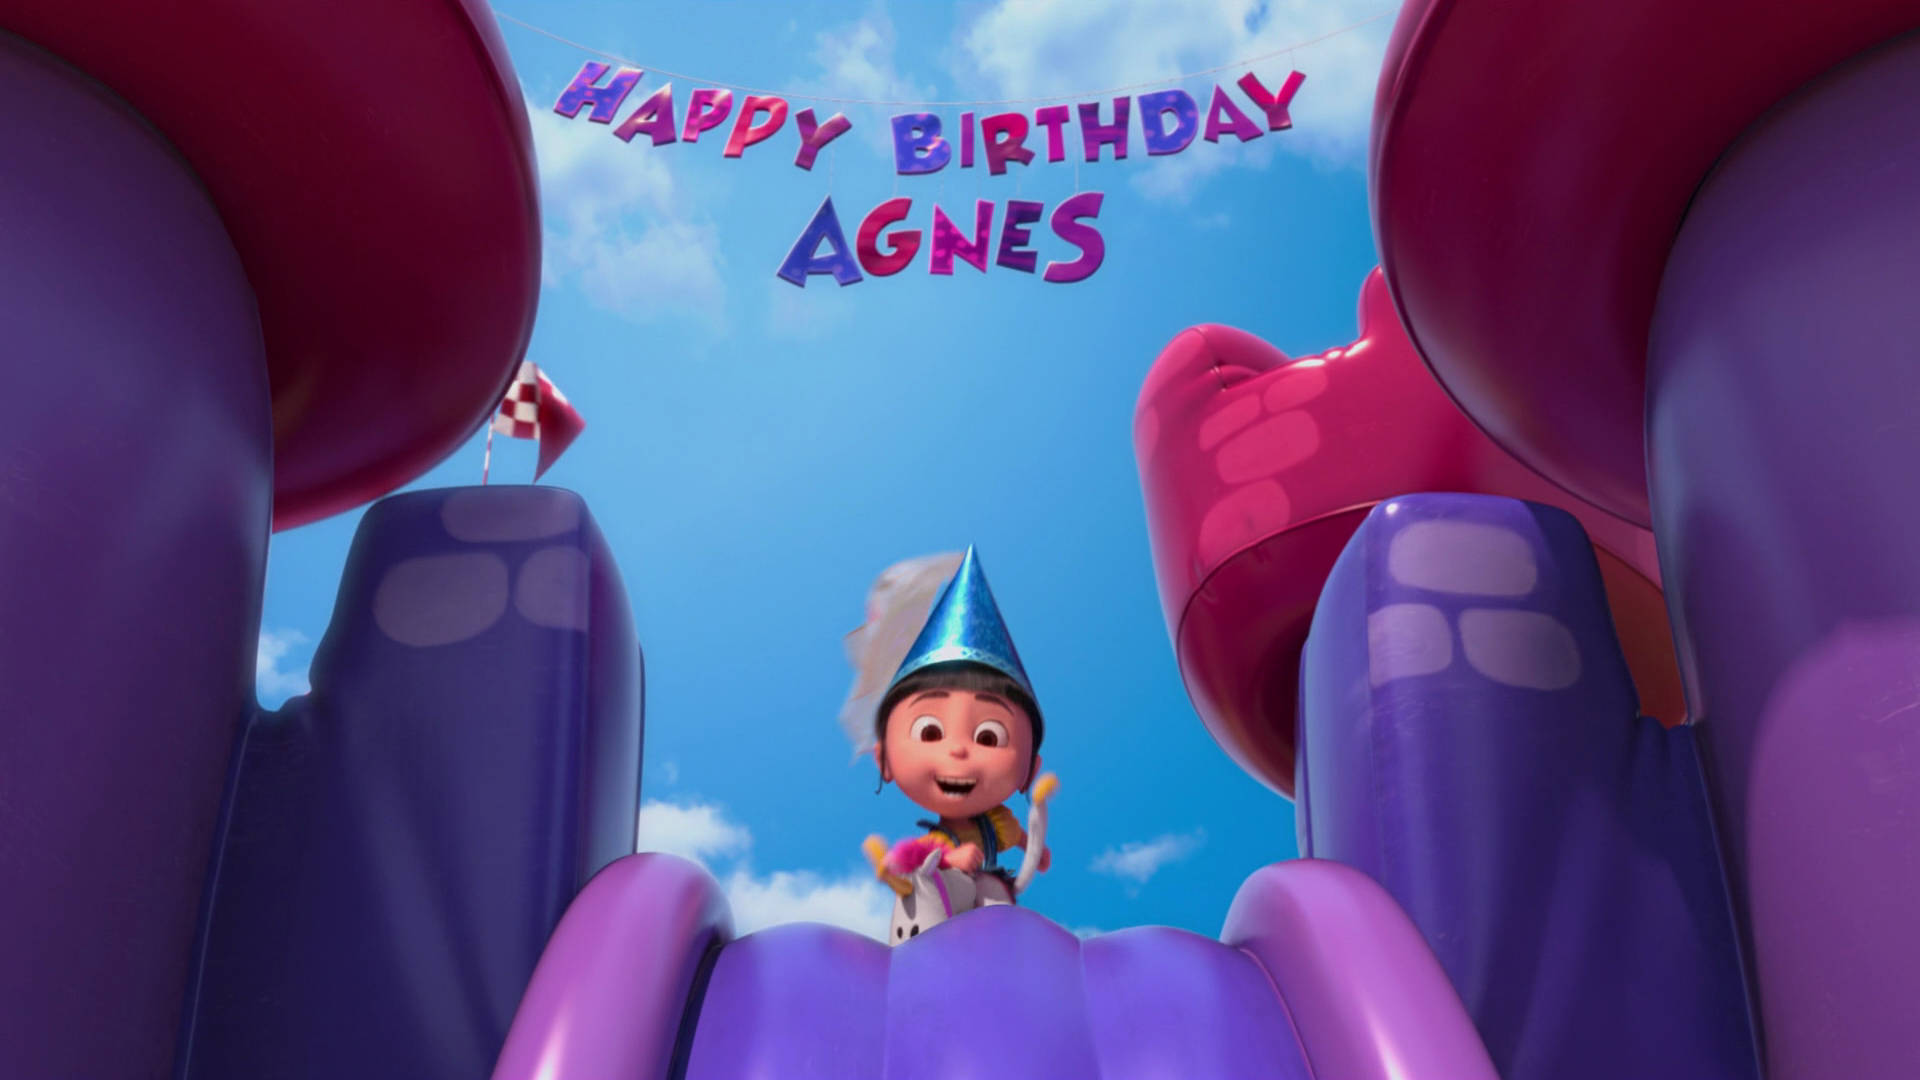 Agnes Birthday Party Despicable Me 2 Picture